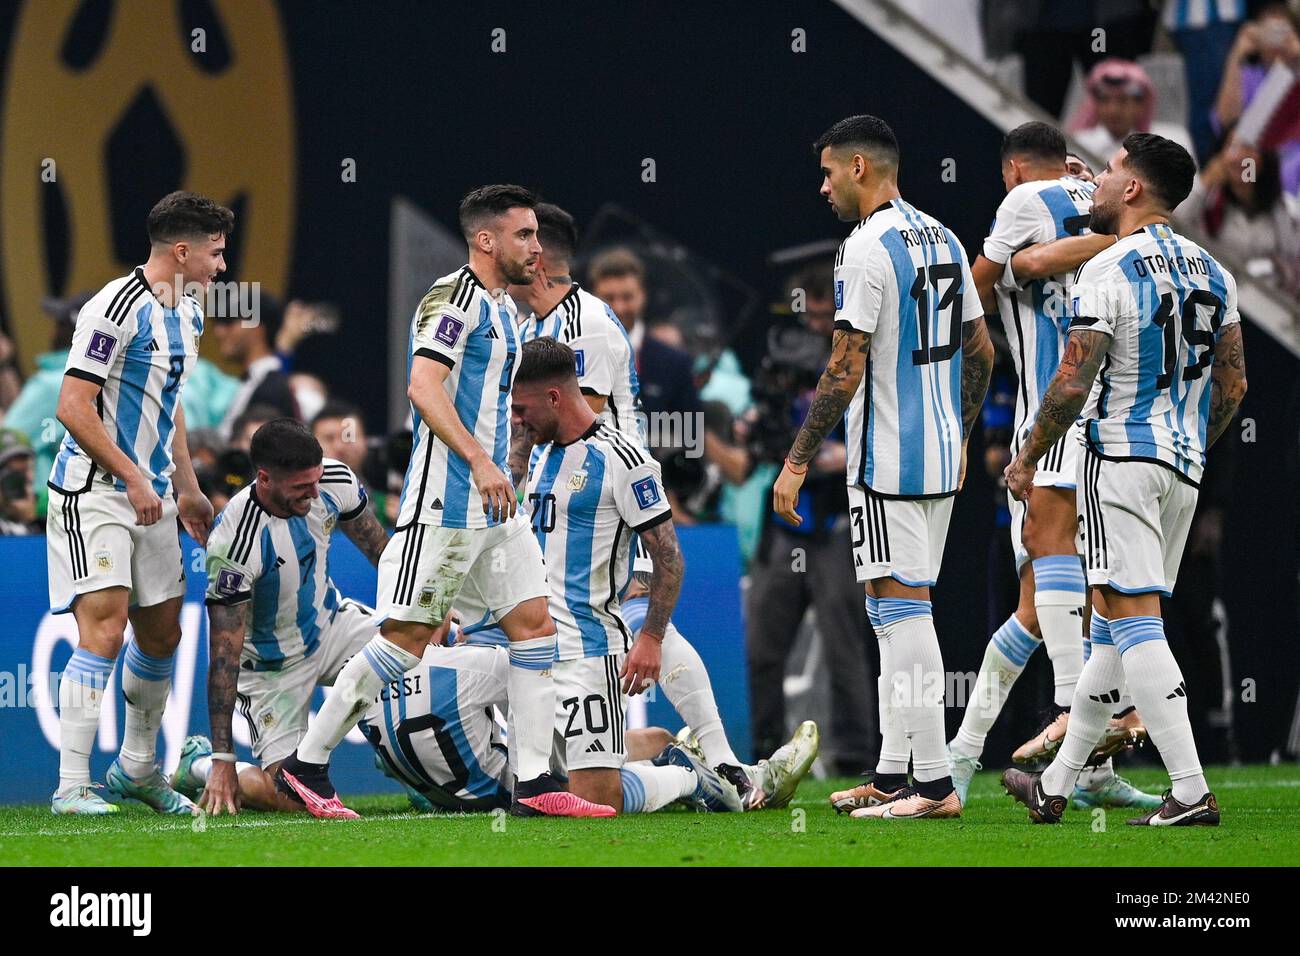 LUSAIL CITY, QATAR - DECEMBER 18: Lionel Messi of Argentina celebrates after scoring the team's first goal with his team mates during the Final - FIFA World Cup Qatar 2022 match between Argentina and France at the Lusail Stadium on December 18, 2022 in Lusail City, Qatar (Photo by Pablo Morano/BSR Agency) Credit: BSR Agency/Alamy Live News Stock Photo